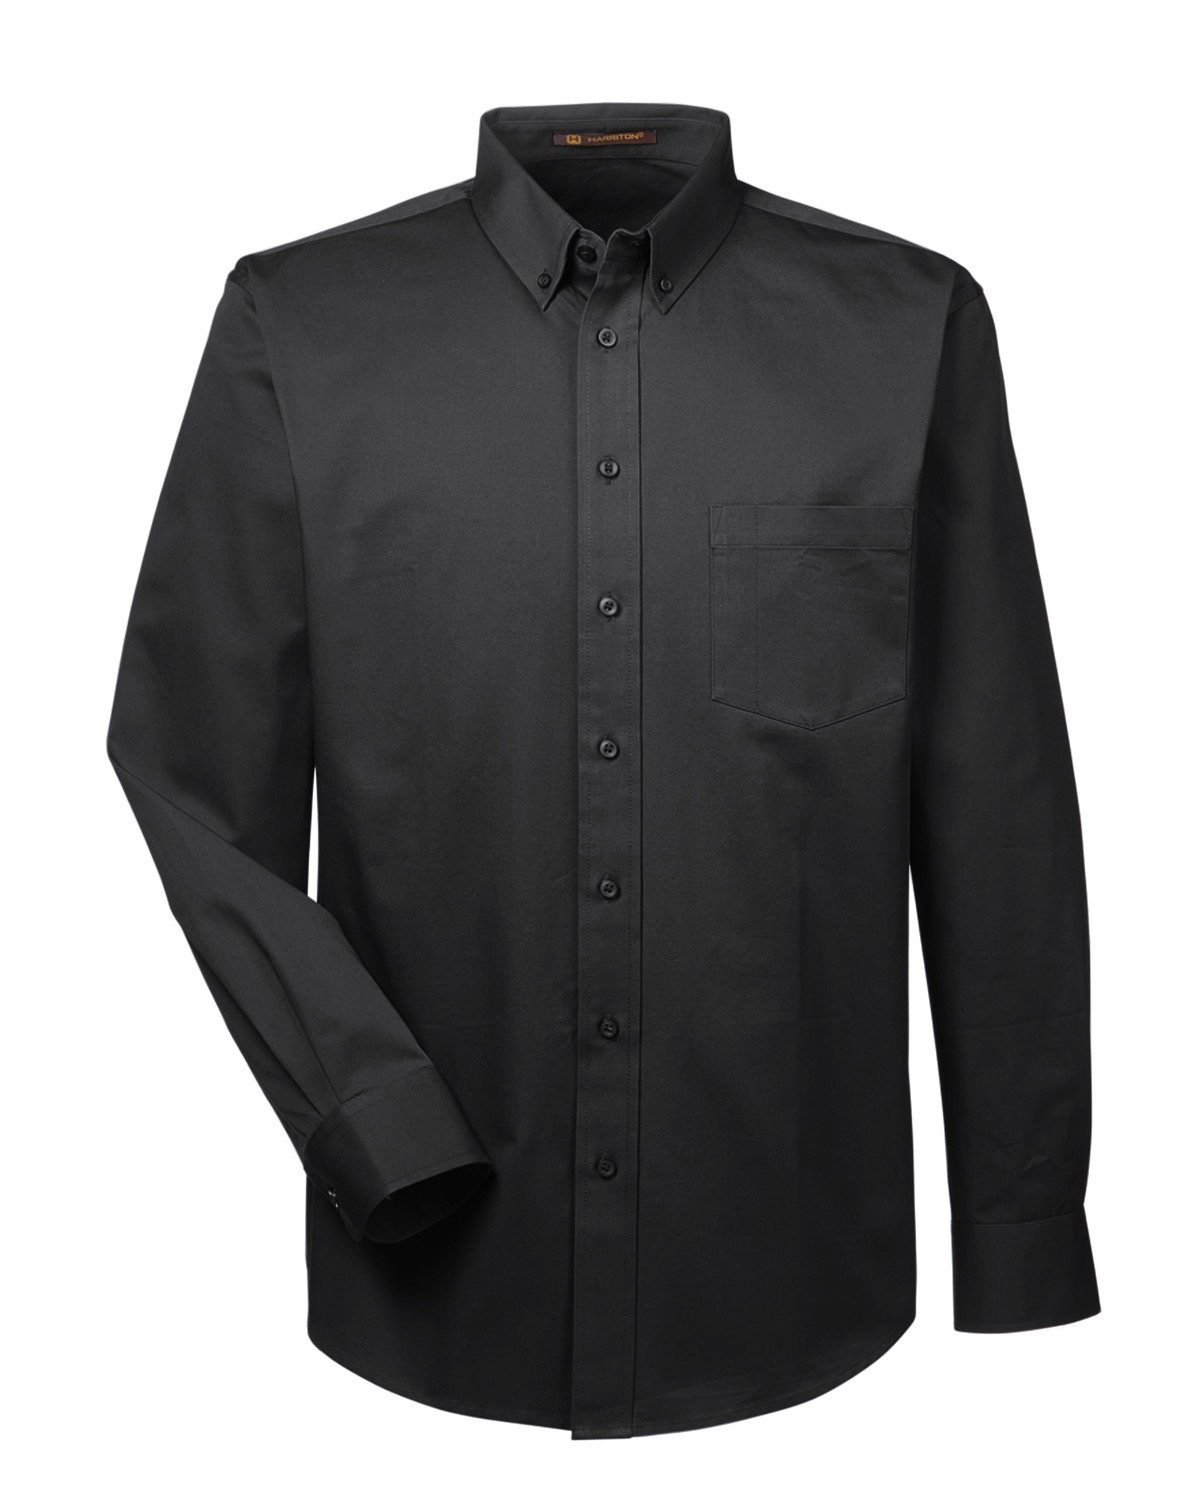 Picture of Harriton Men's Foundation 100% Cotton Long-Sleeve Twill Shirt with Teflon™